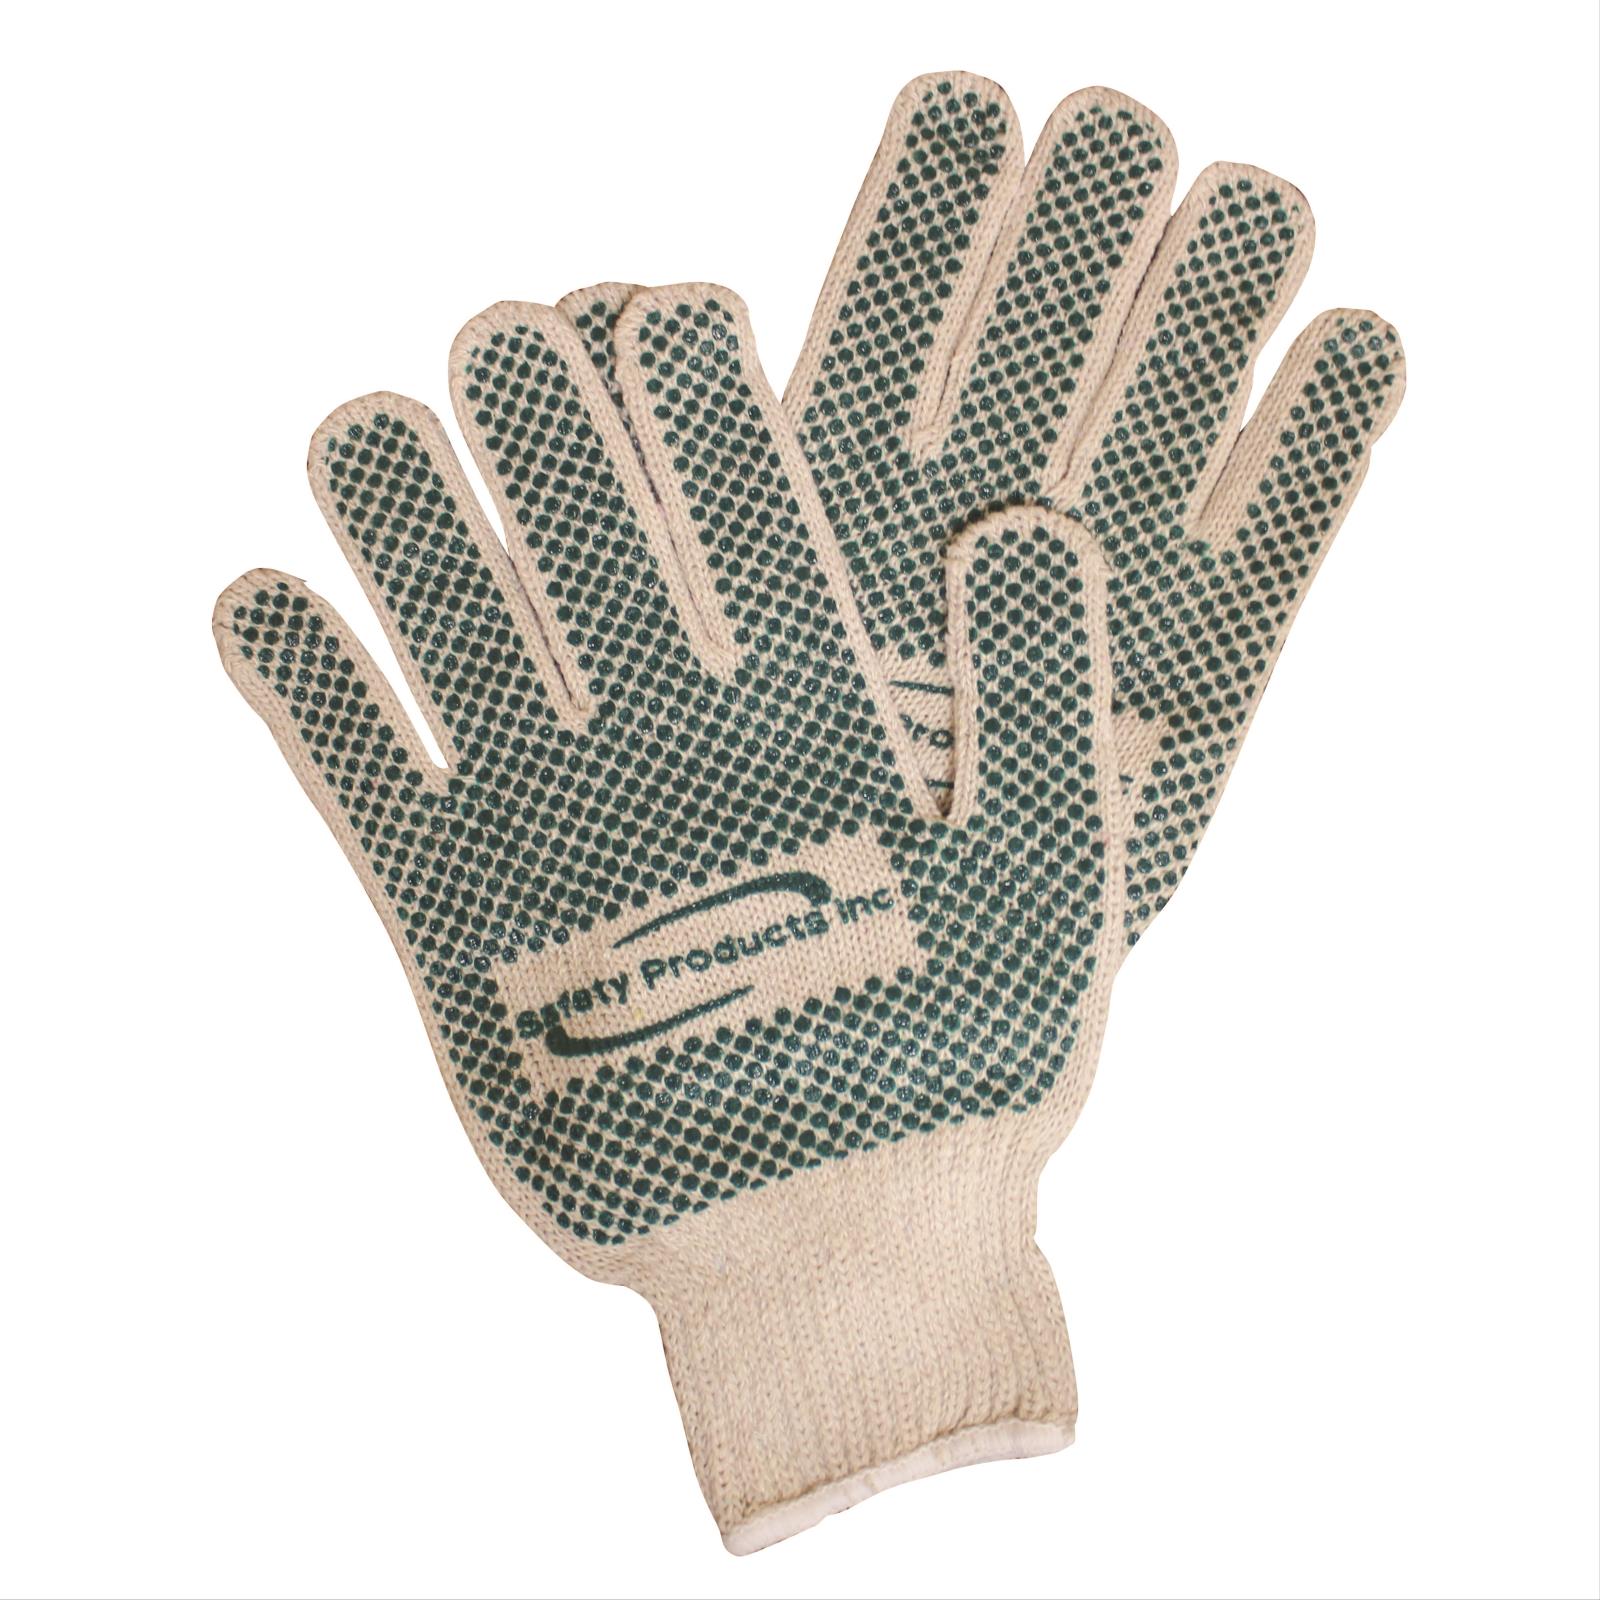 Safety Products Inc Branded Gloves, PVC Cotton String Dots